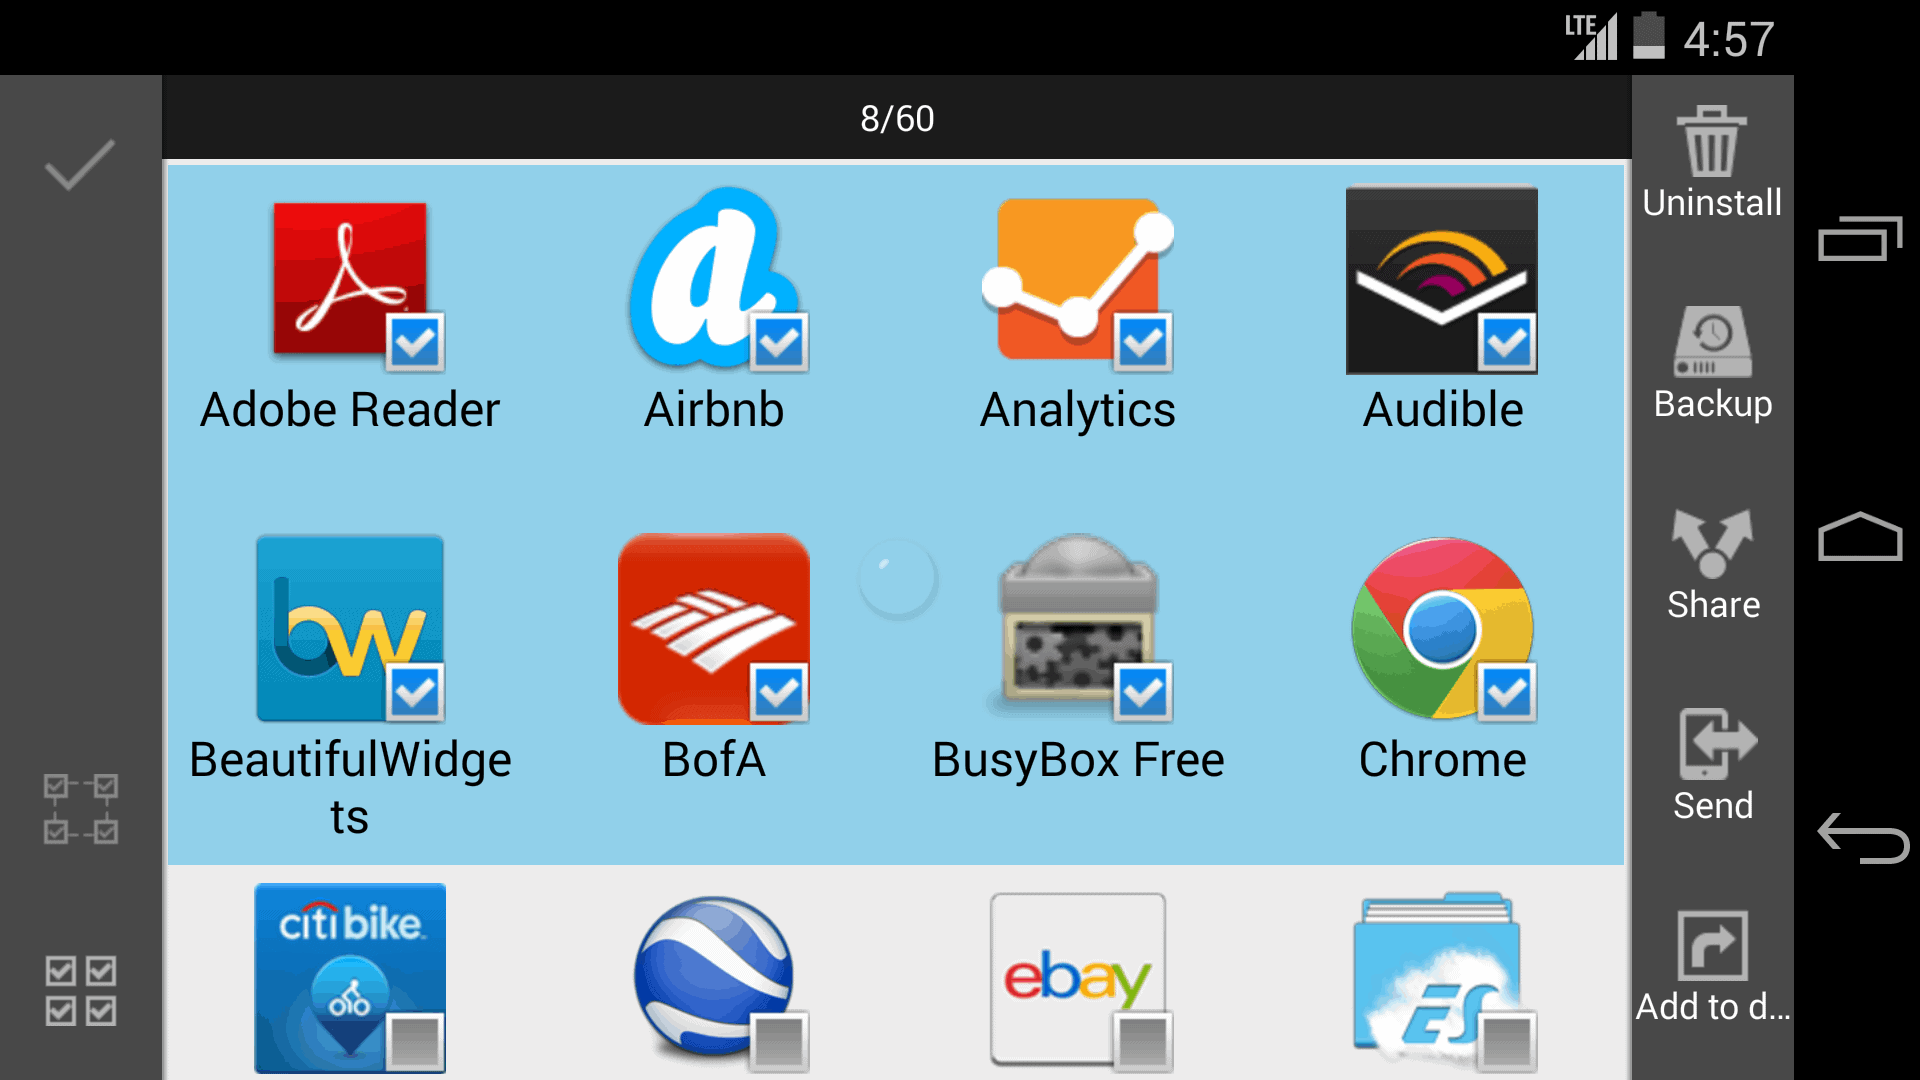 How To Uninstall Multiple Apps at Once (Without Root Access)